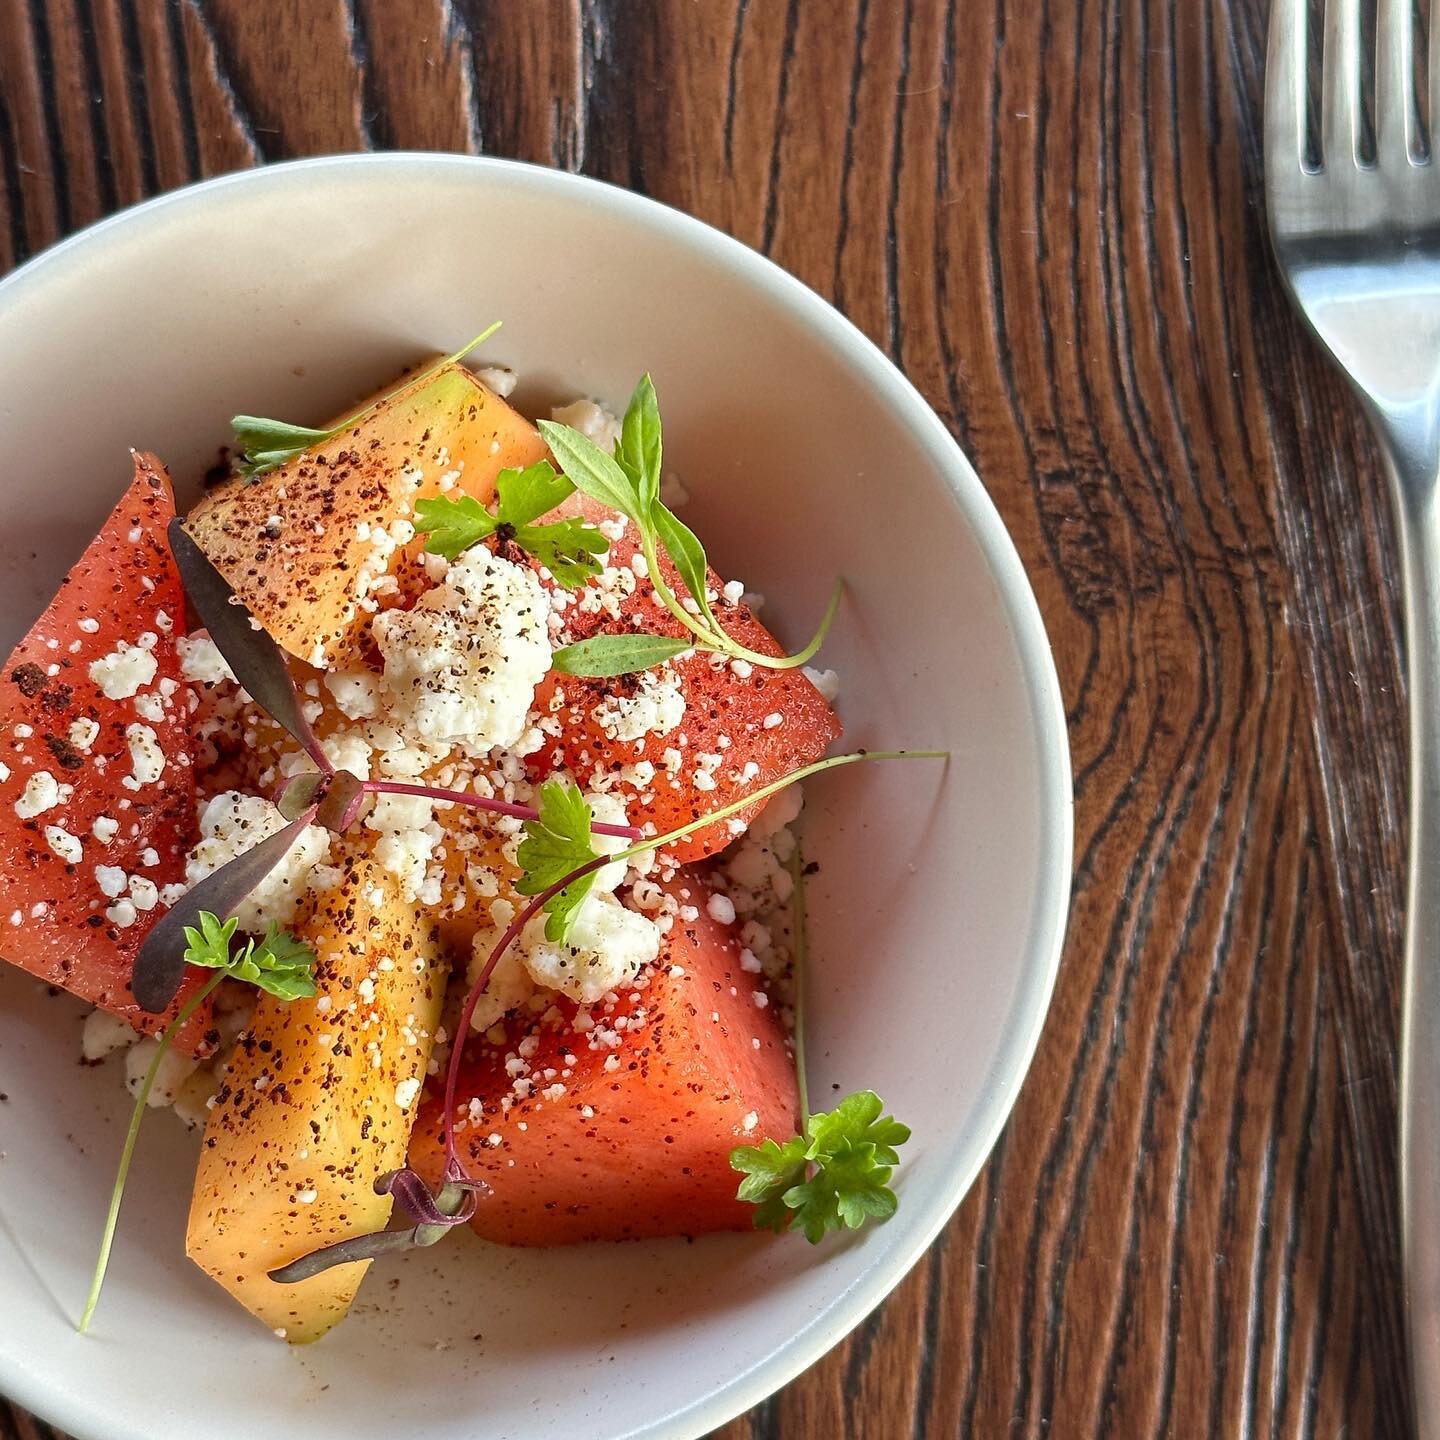 One of our favorite shareable side is the ensalada: a rotating, fresh salad. This variation is watermelon, cantaloupe, and cucumbers dressed in a light lime dressing, toasted with queso fresco, chile, and cilantro. It&rsquo;s the perfect side for the